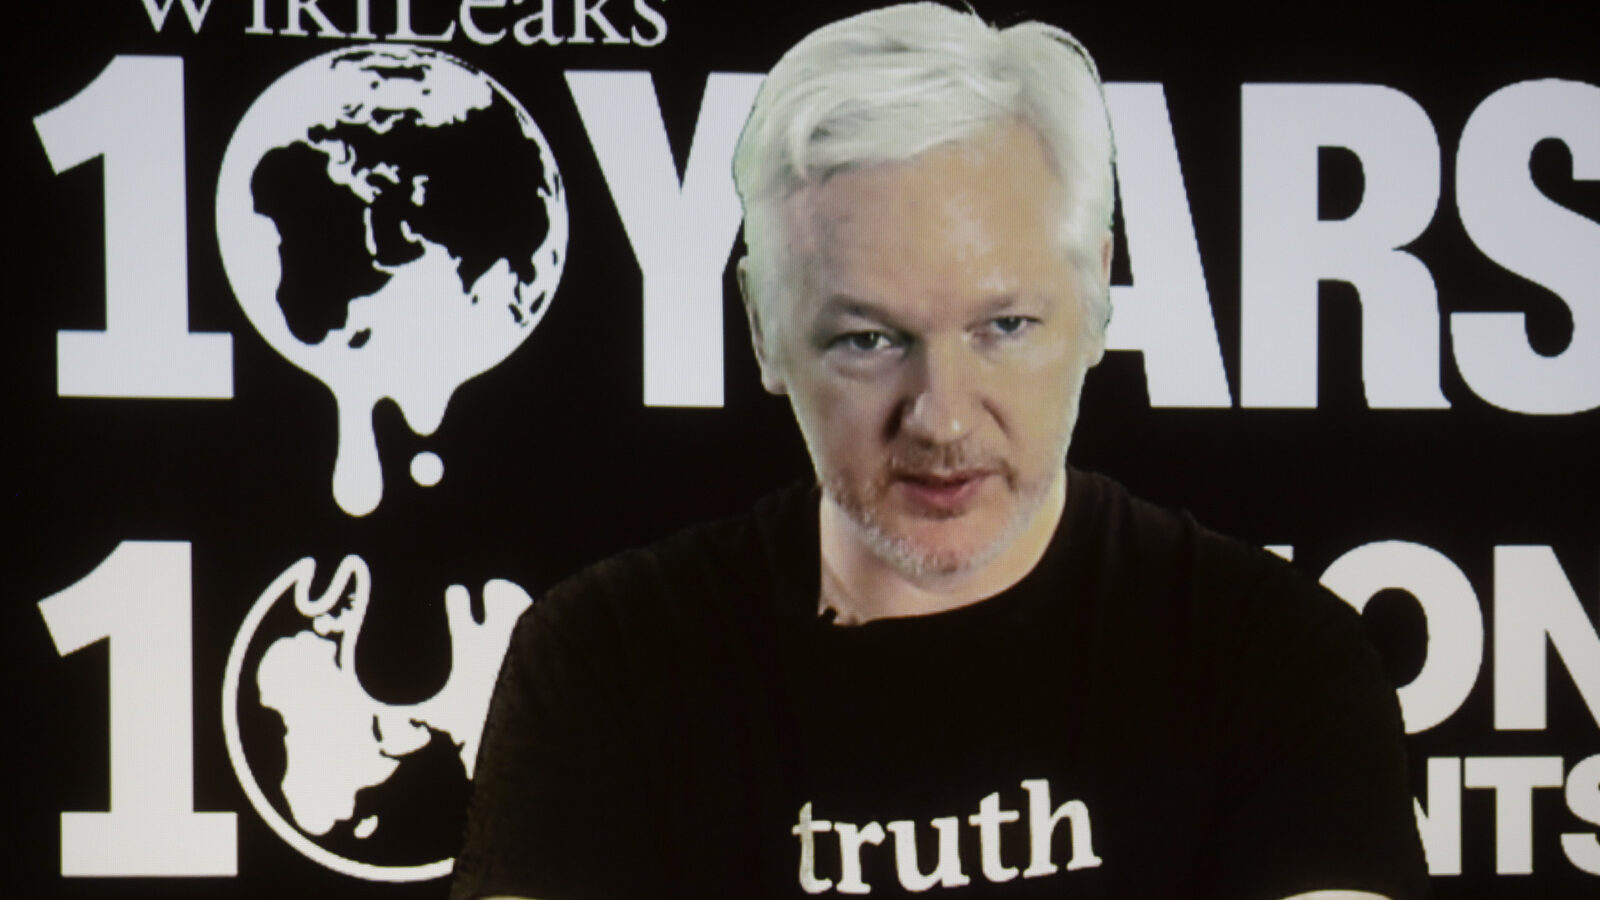 WikiLeaks founder Julian Assange participates via video link at a news conference marking the 10th anniversary of the secrecy-spilling group in Berlin, Germany, Tuesday, Oct. 4, 2016.